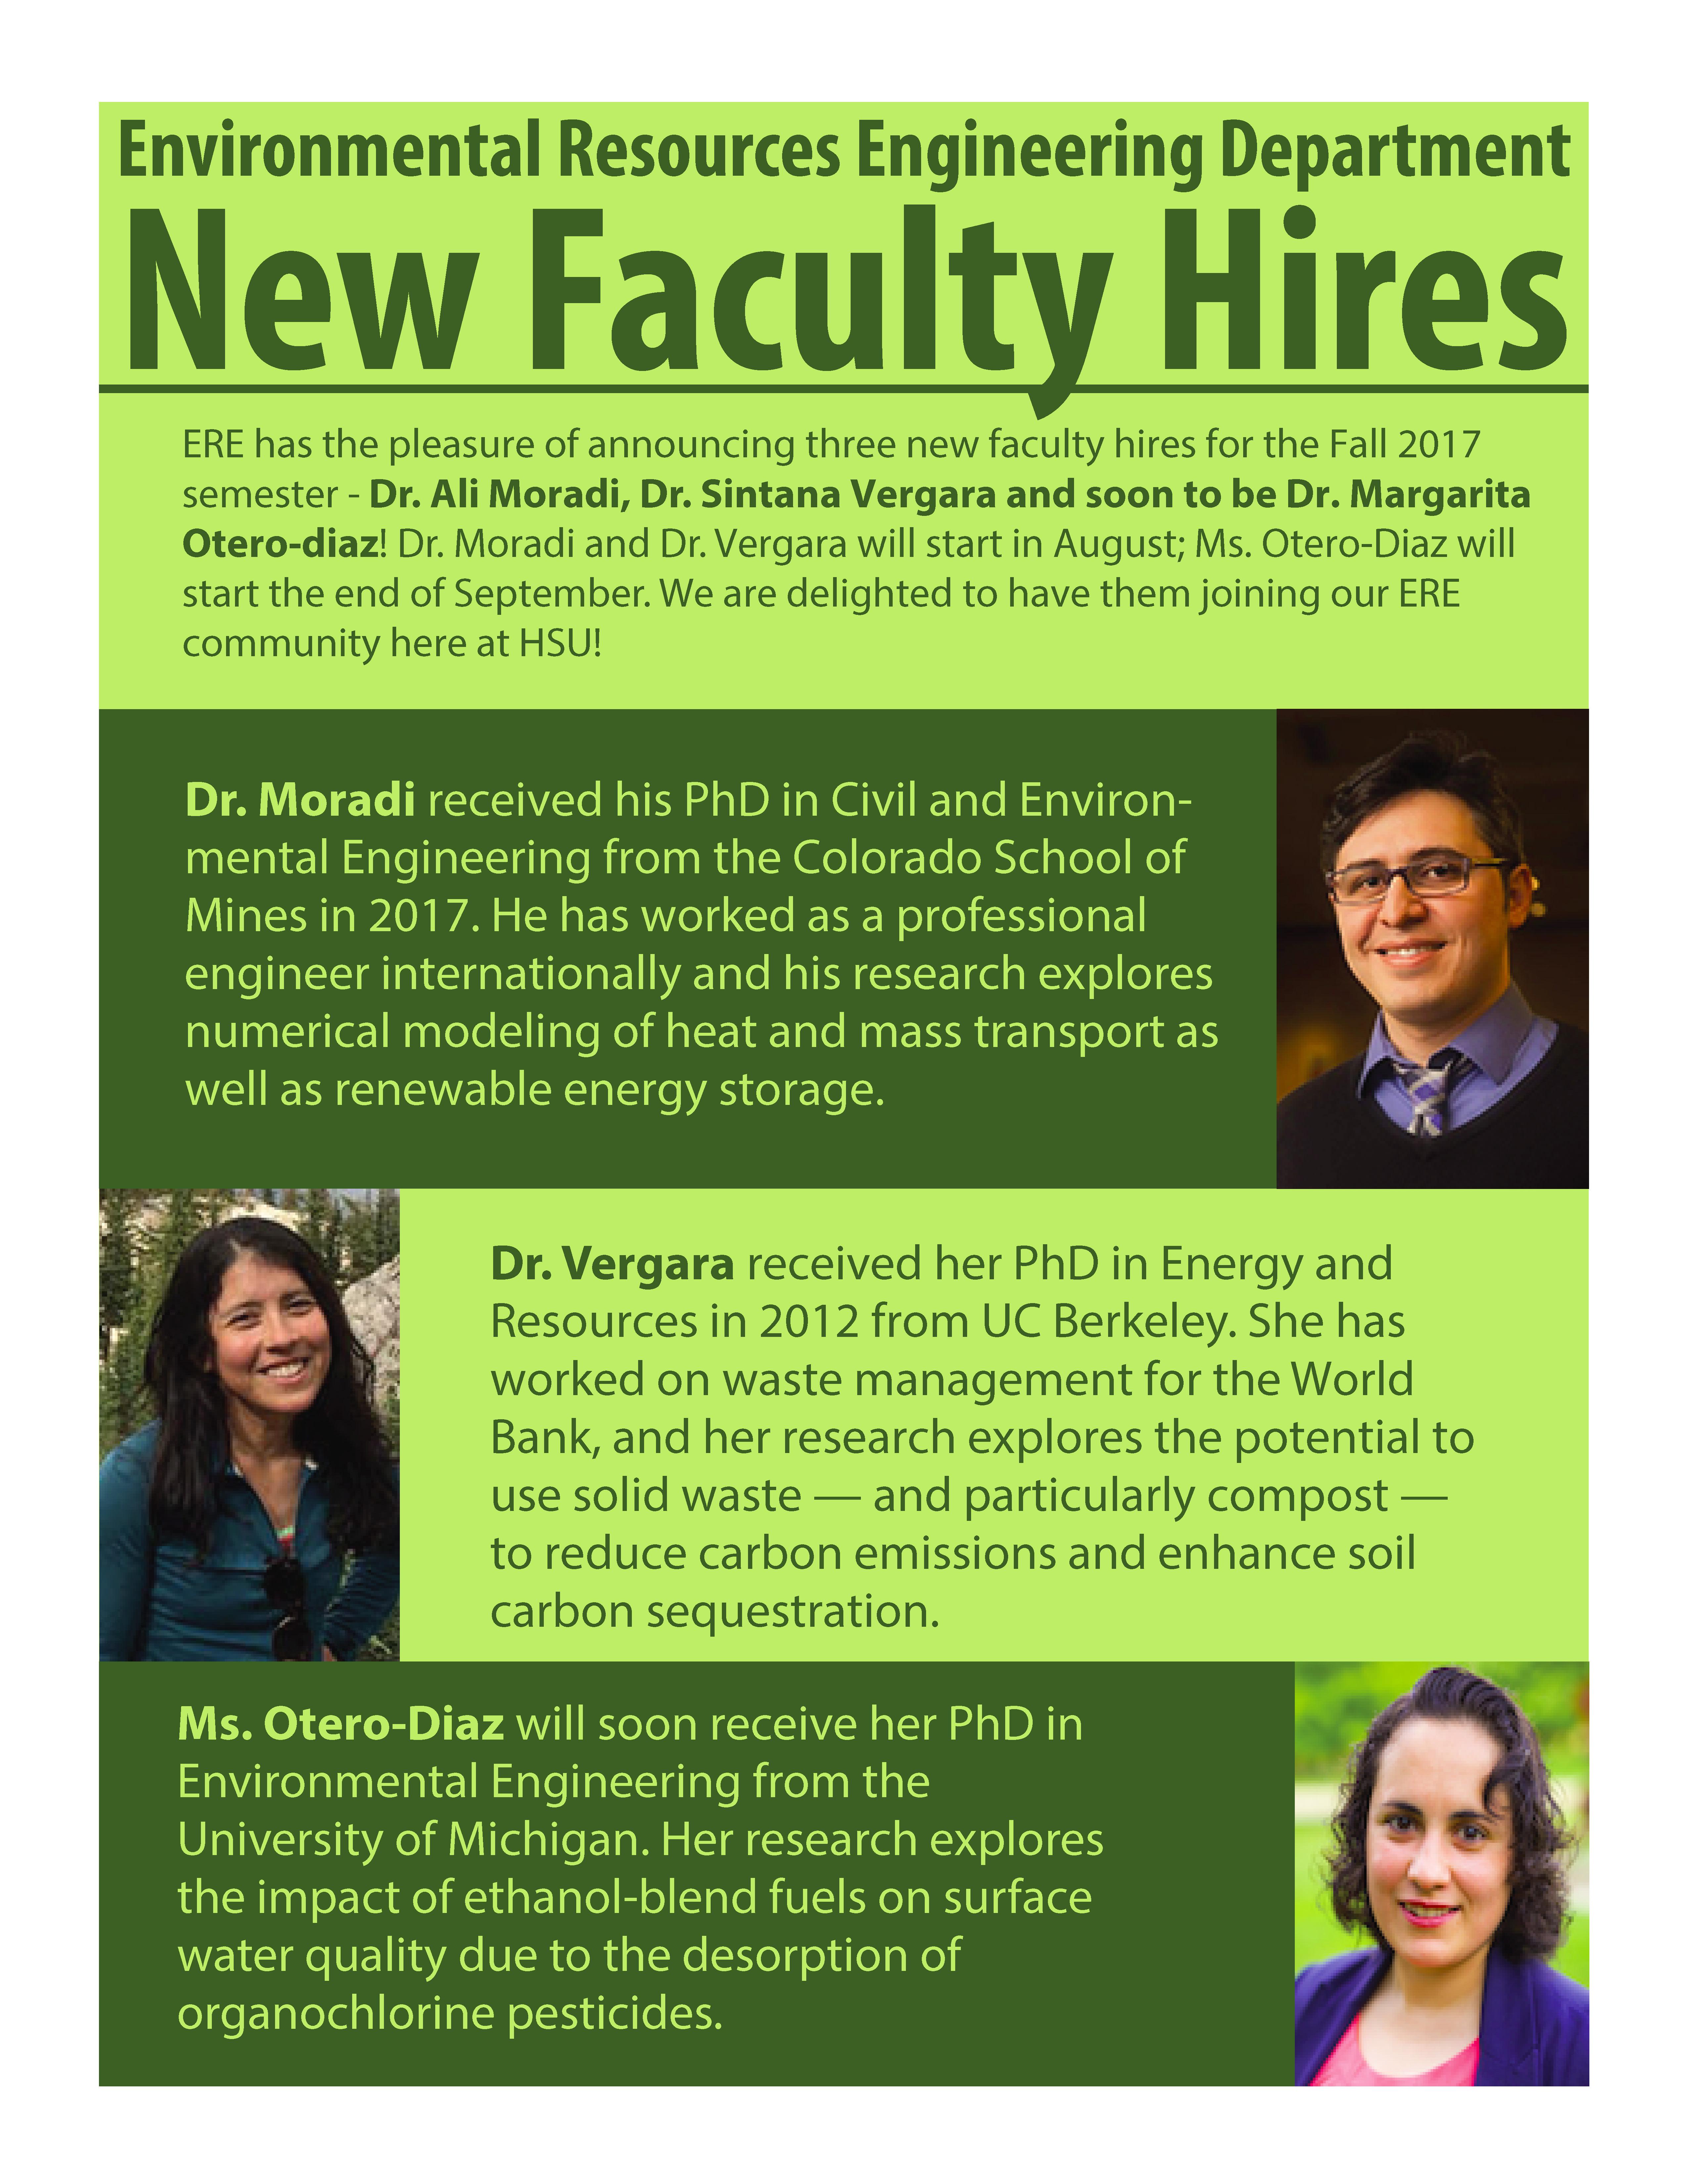 Three New ERE faculty